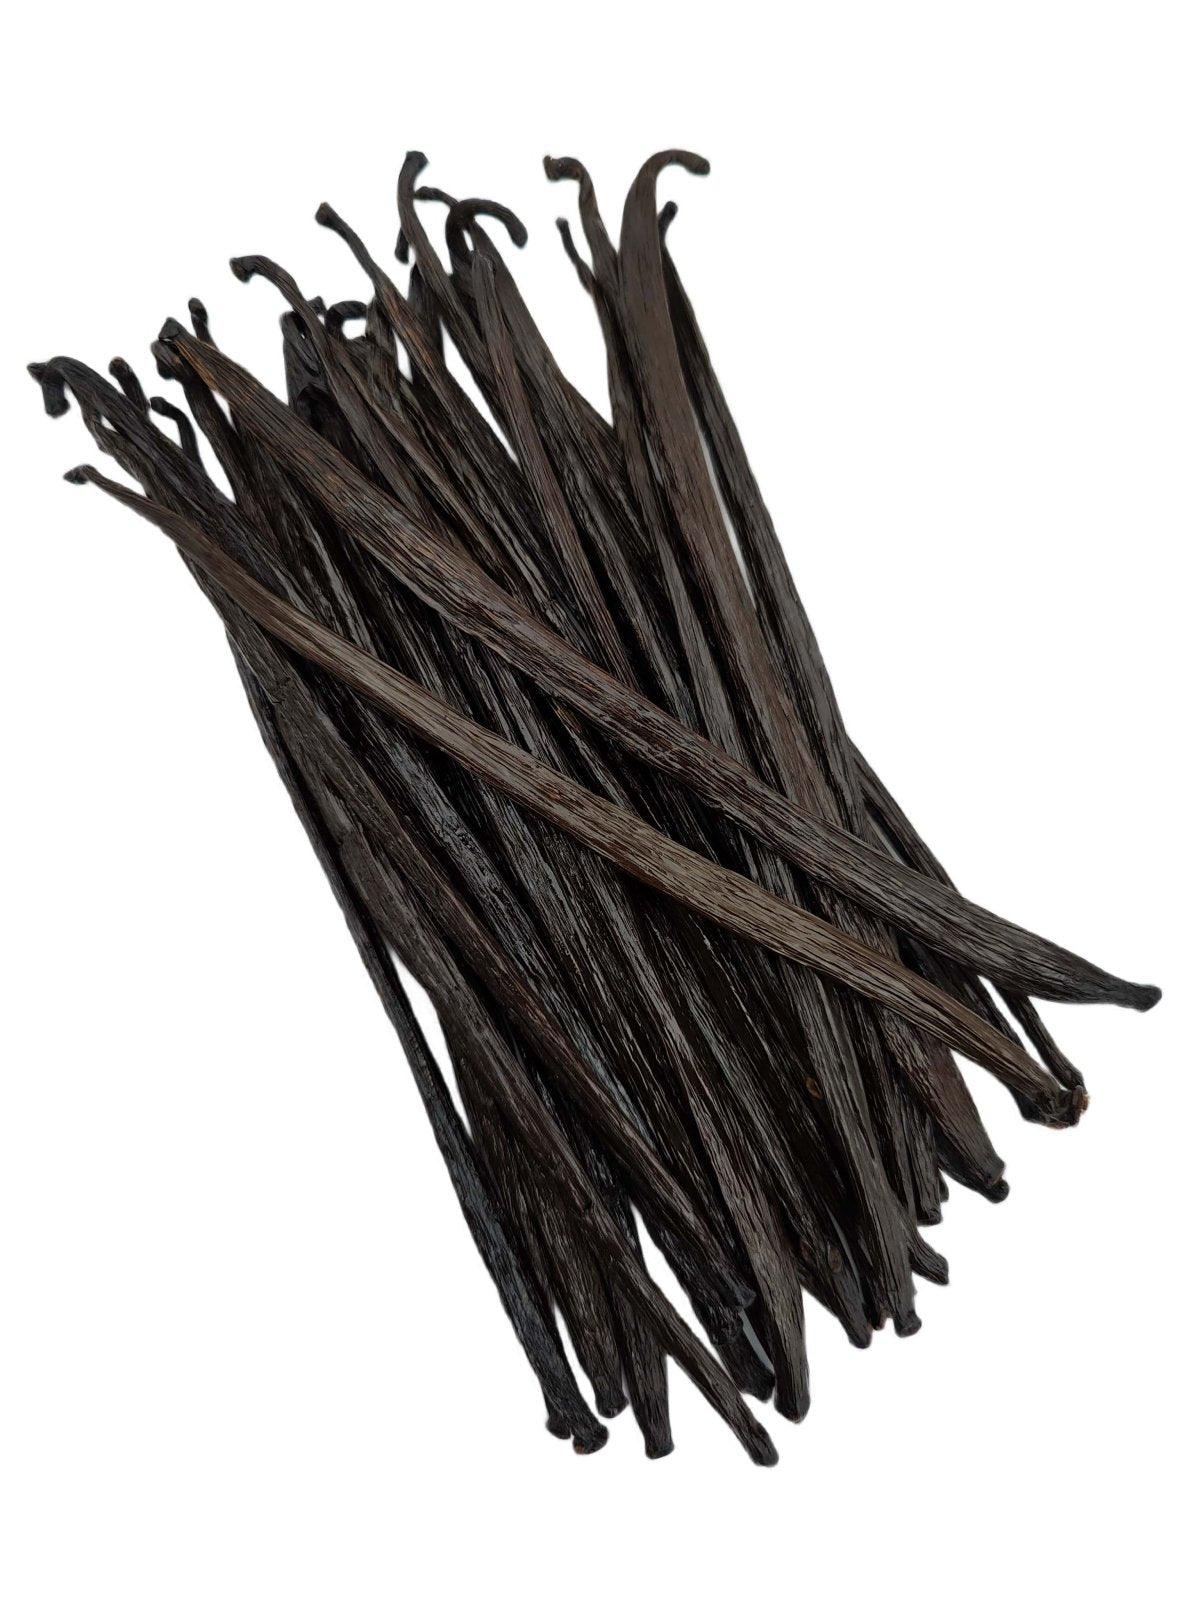 Indonesian Planifolia Gourmet Grade-A Vanilla Beans<br>For Extract And Baking<BR>1/4 lb, 1/2 lb, 1 lb, 2 lb - Spice-Land Wholesale